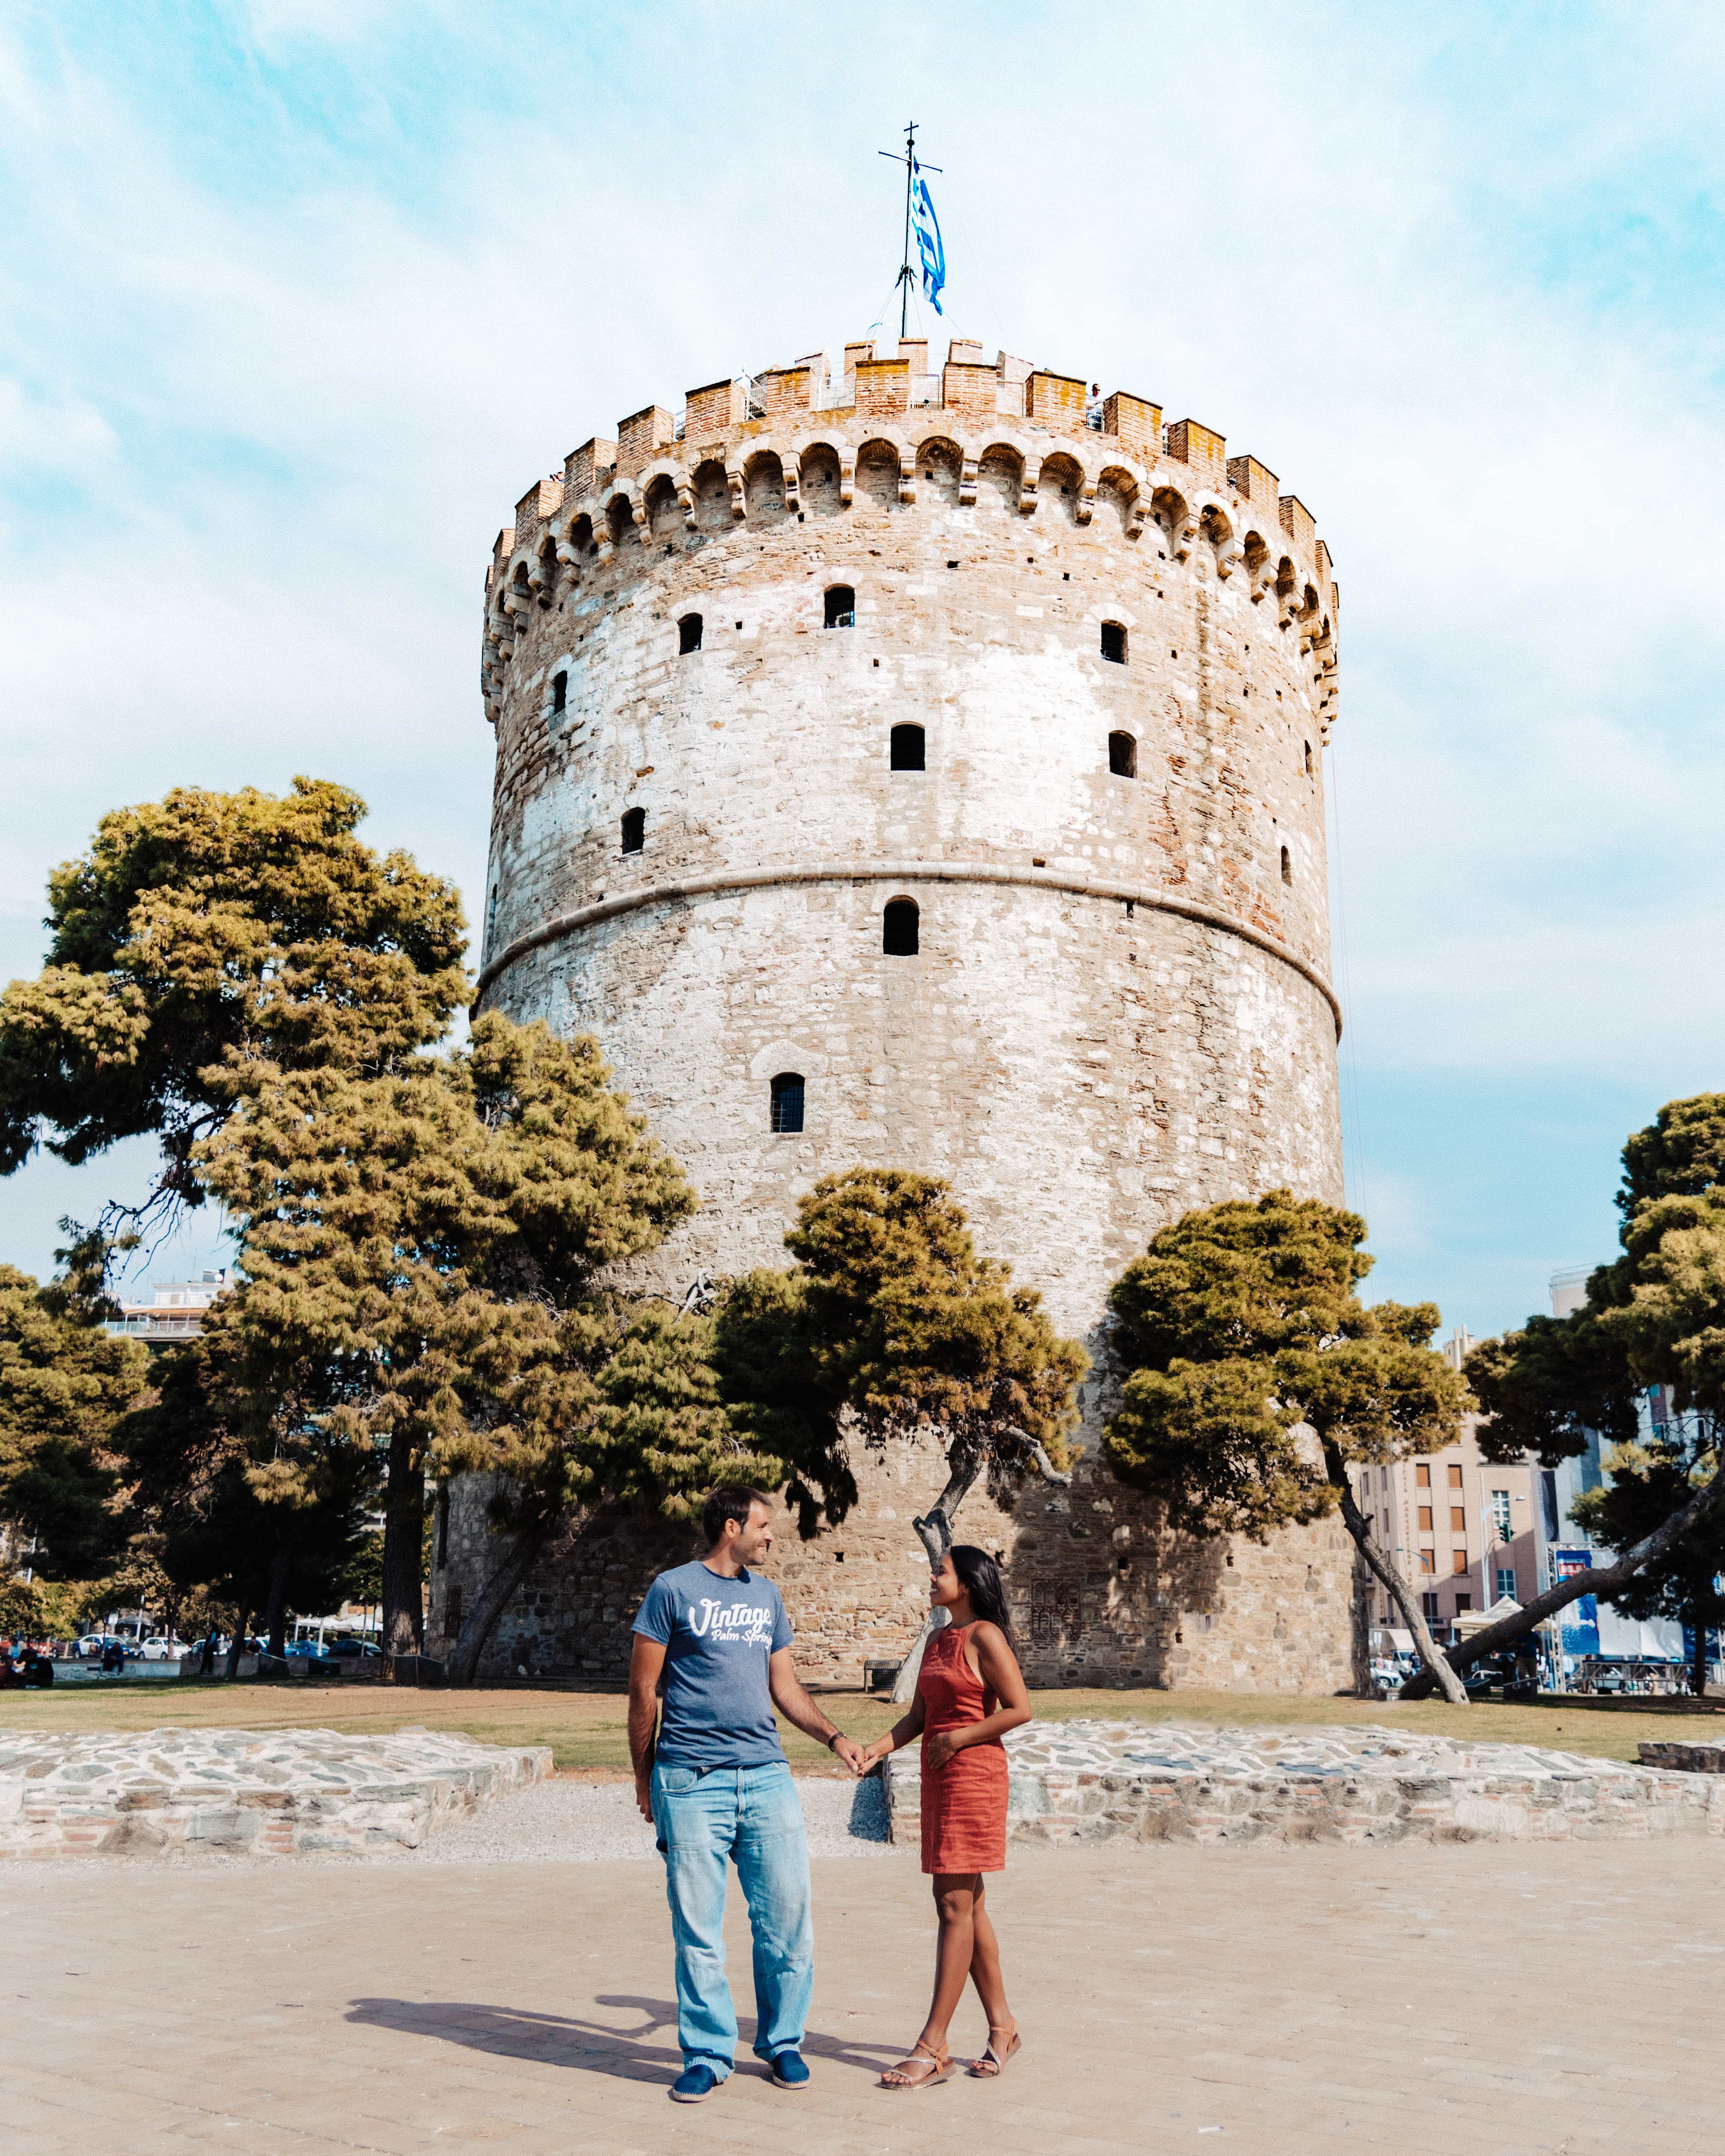 Thessaloniki travel guide, things to do in Thessaloniki, food to try in Thessaloniki, best time to visit thessaloniki, how to get to thessaloniki from the airport, how to get to thessaloniki, white tower